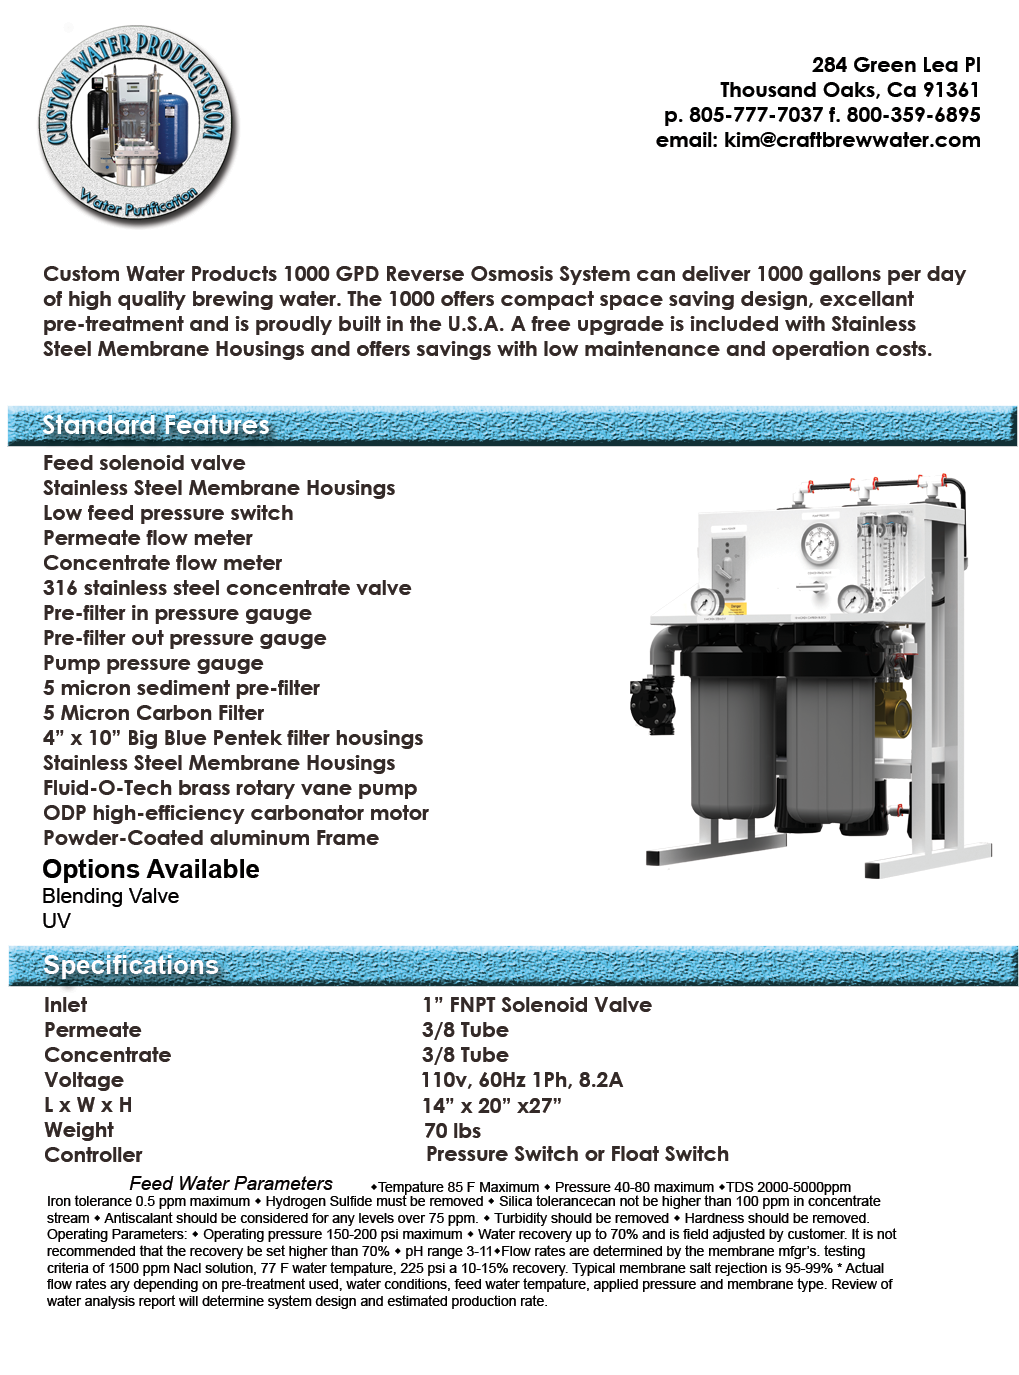 Brewing Water 1000 GPD Reverse Osmosis Specifications